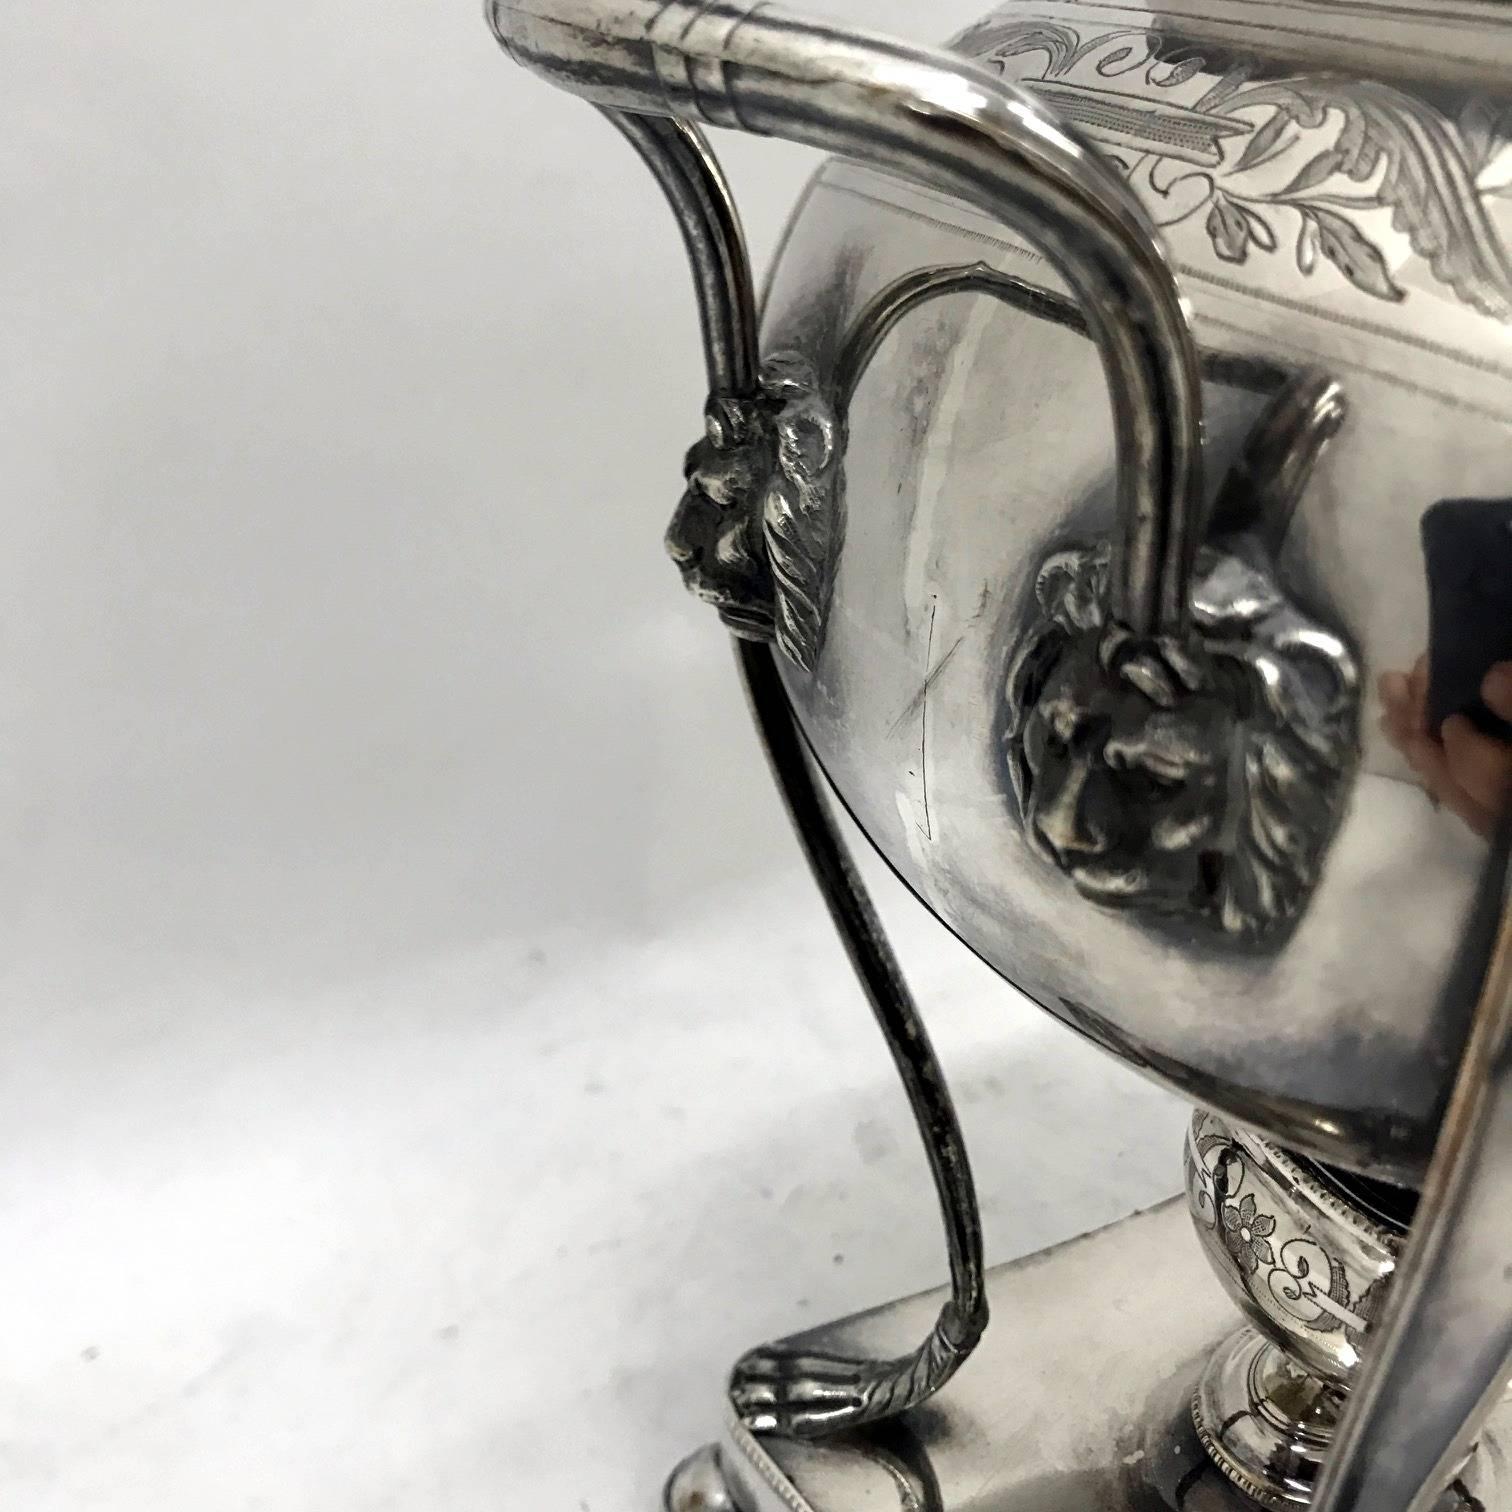 Elegant and graceful samovar (or tea urn) in Old Sheffield Plate, the body is smooth but at the top has delicate floral engravings and is supported at the rectangular base with stylized lion paws, the smooth handles are soldered to the body with